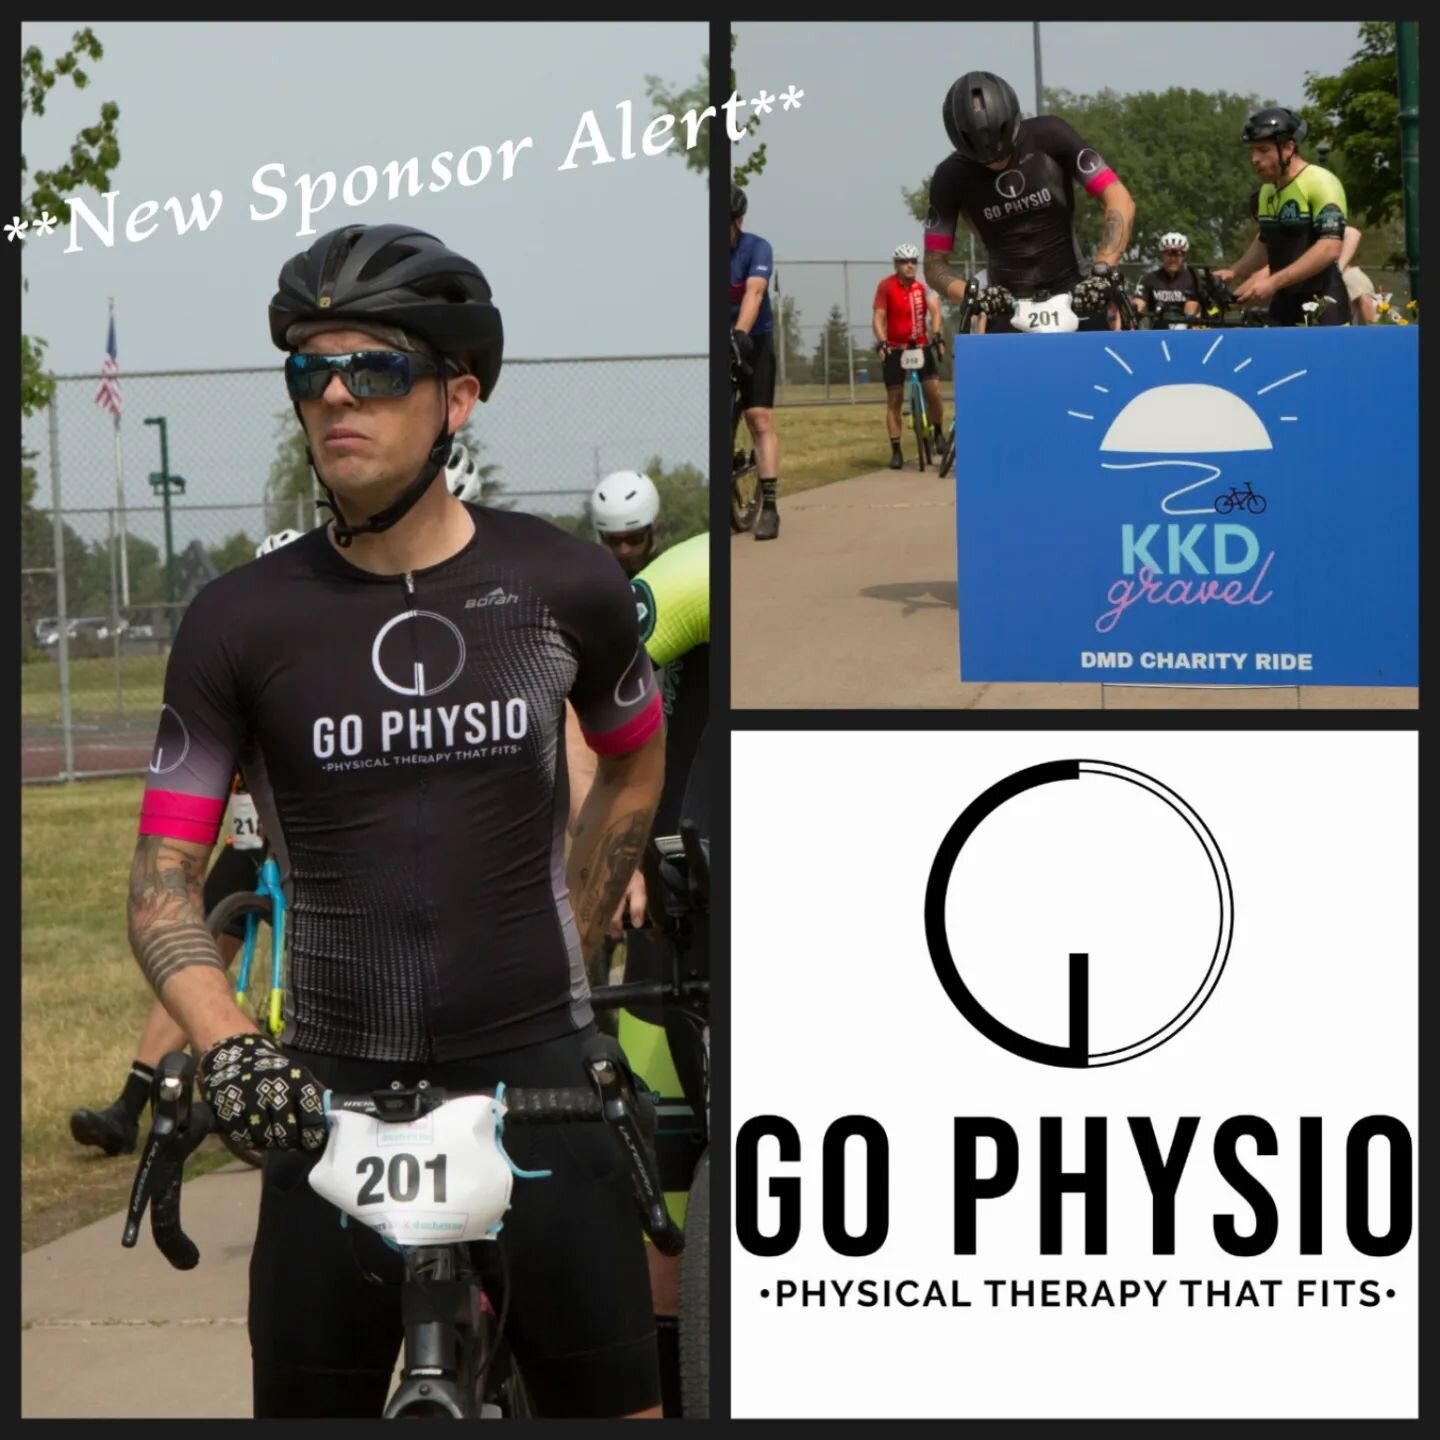 Announcing a SUPER new sponsor for this super Sunday--@go_physio_mn--Go Physio Physical Therapy &amp; Bike Fitting!

Like a lot of our sponsors, this one is personal. Paulie Glatt of Go Physio has been working with me since July to get me back on the